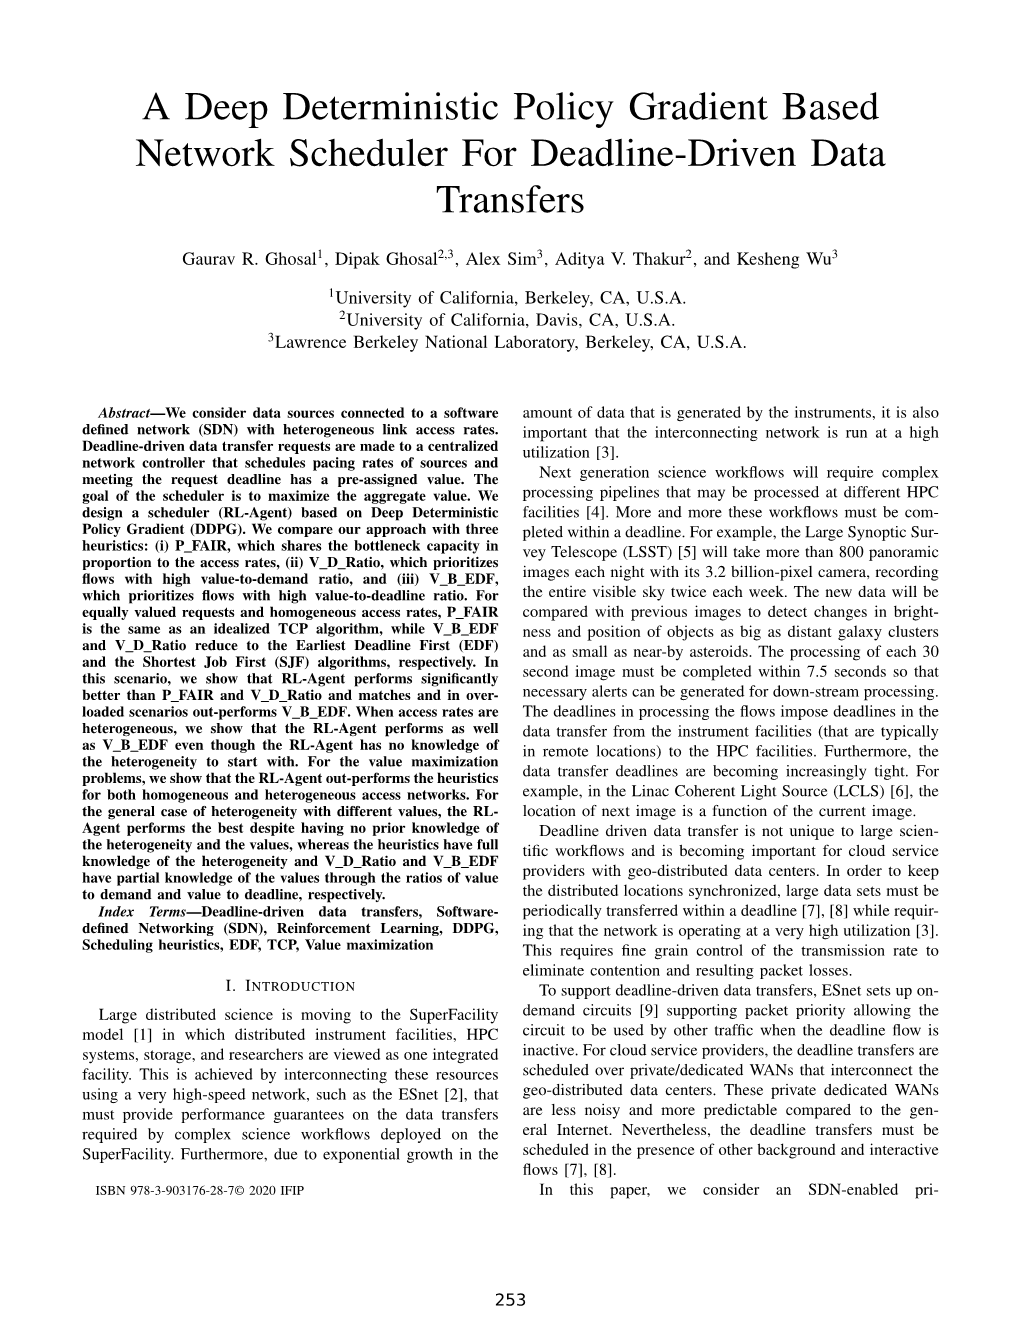 A Deep Deterministic Policy Gradient Based Network Scheduler for Deadline-Driven Data Transfers